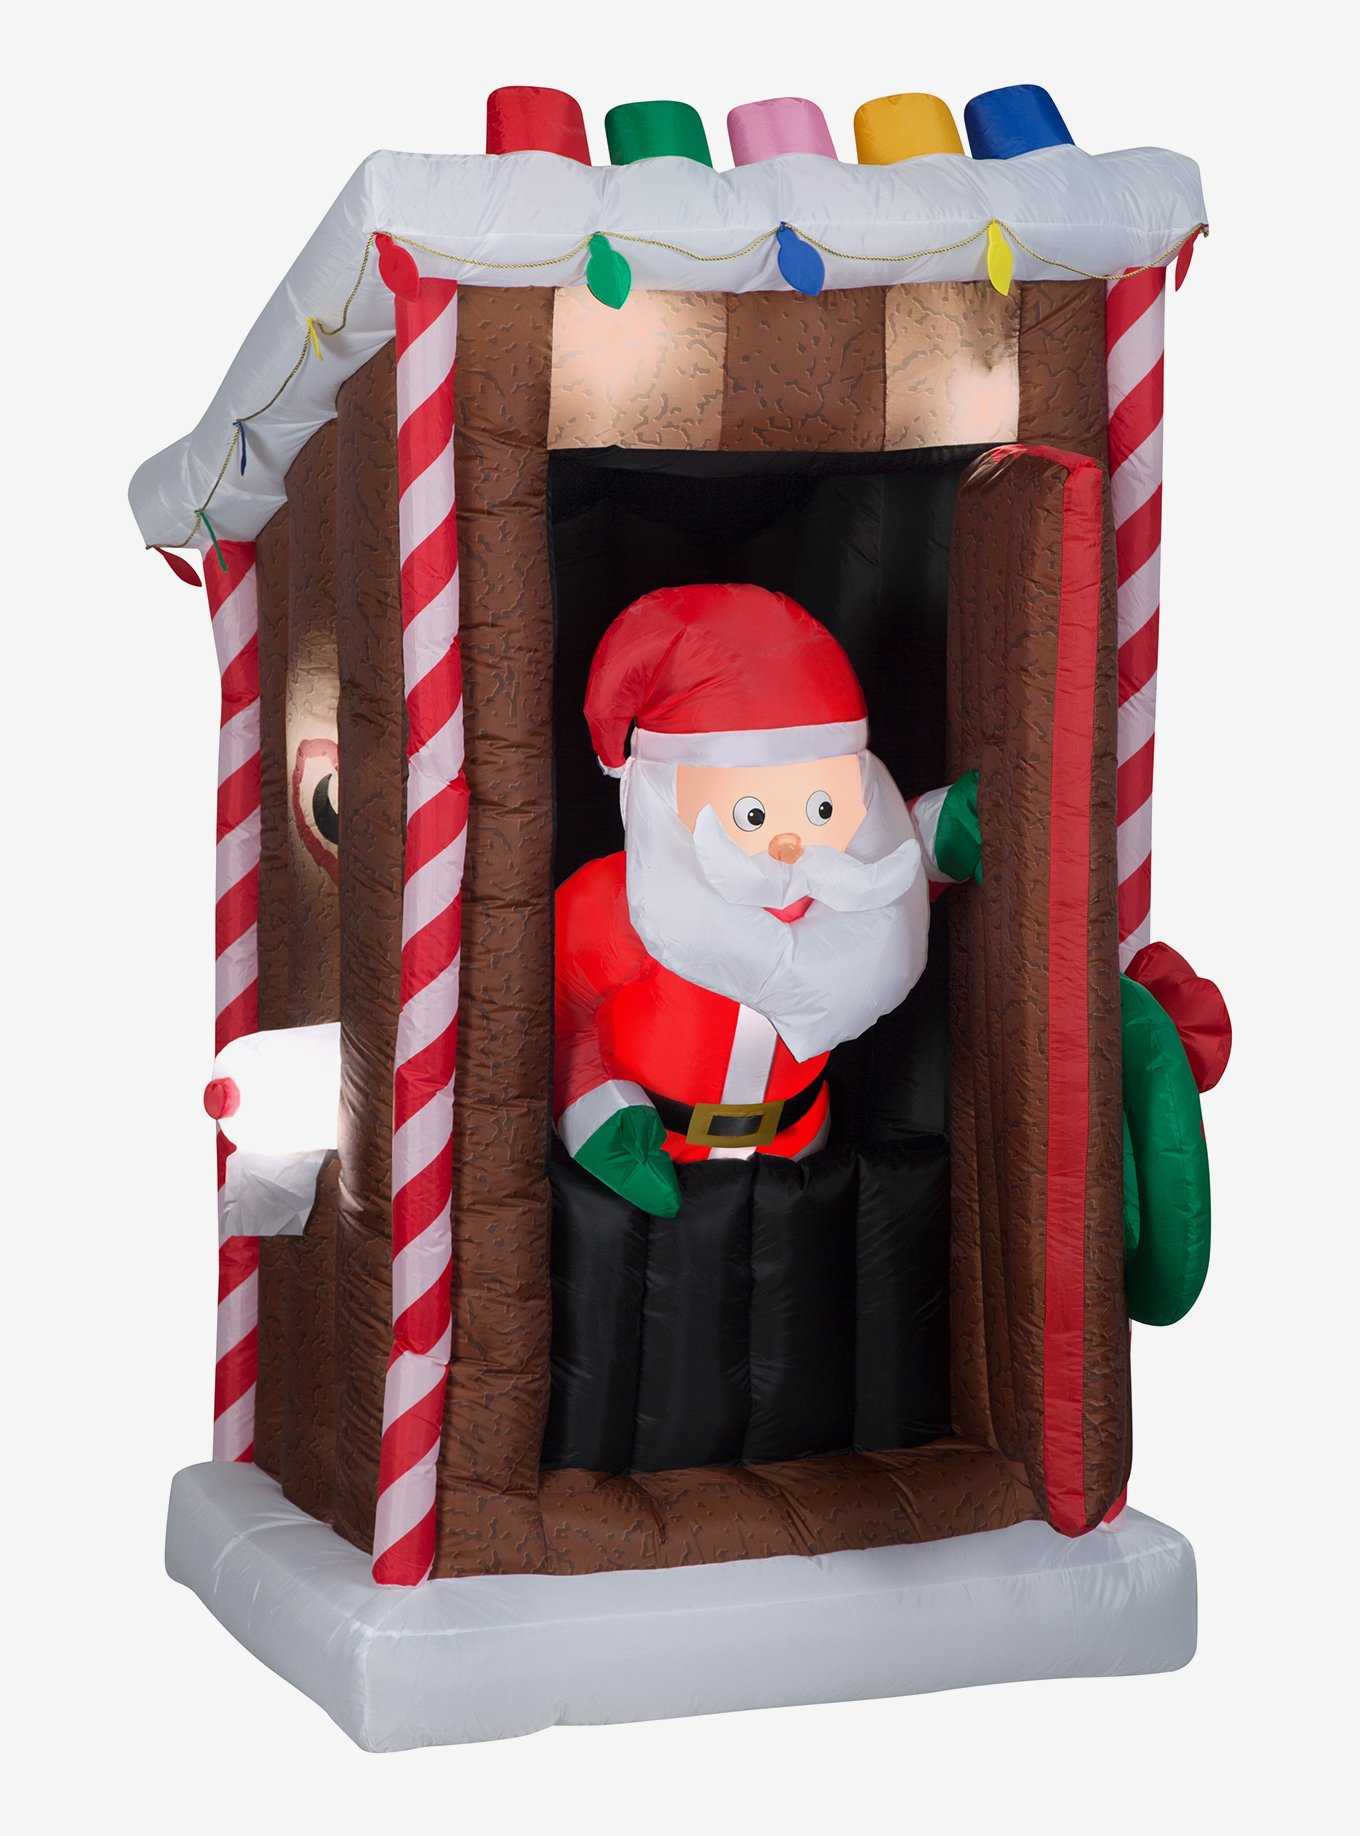 Santa's Outhouse Animated Airblown, , hi-res